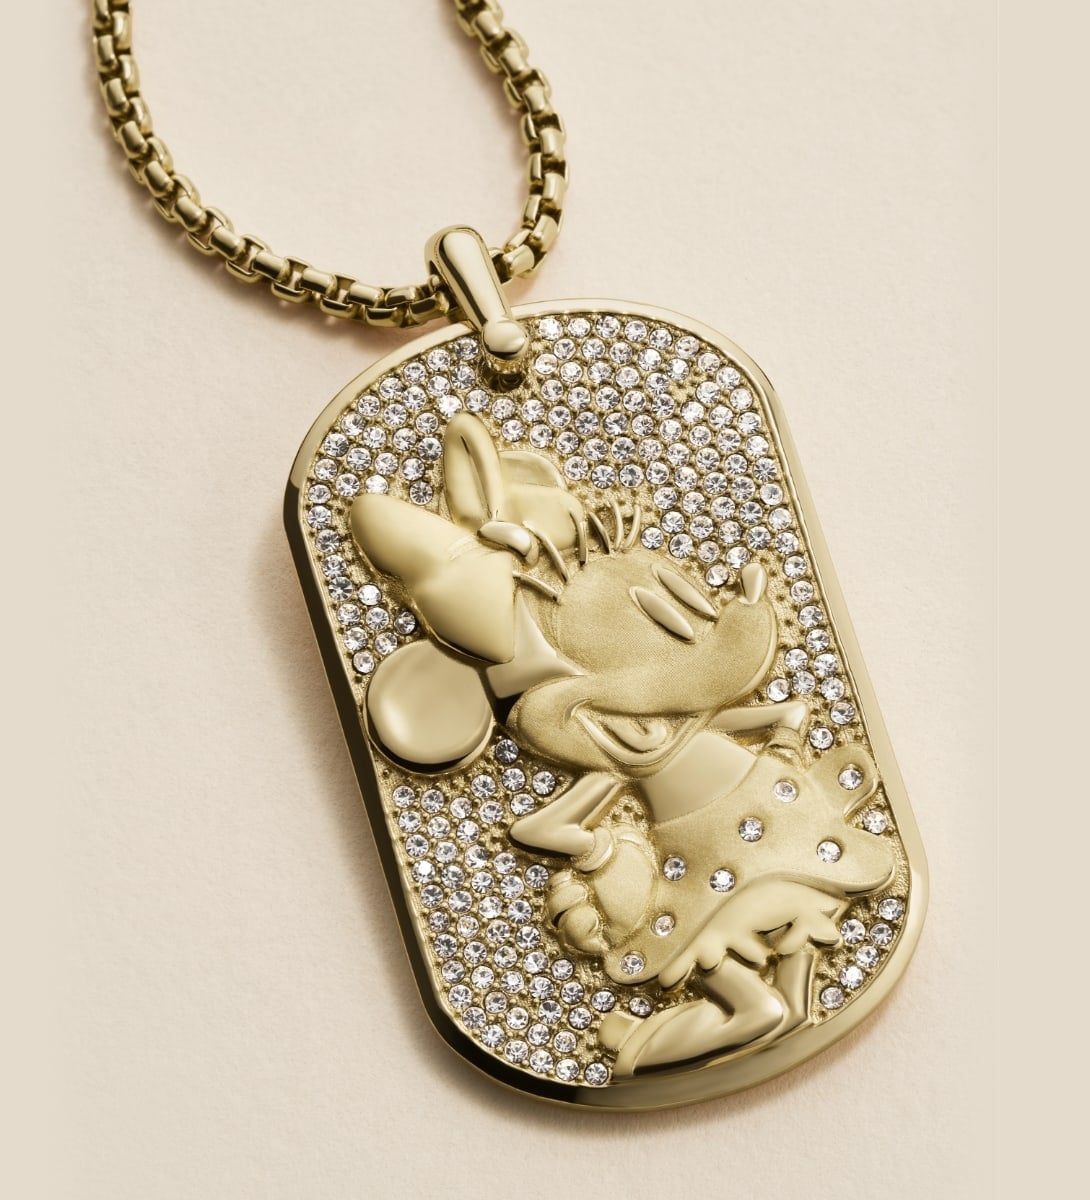 An animated GIF of two images. The first image features an all-black Mickey Mouse figurine pendant necklace studded with black hematite crystals. The second image showcases a gold-tone pendant of Minnie Mouse's profile, accented with crystals.